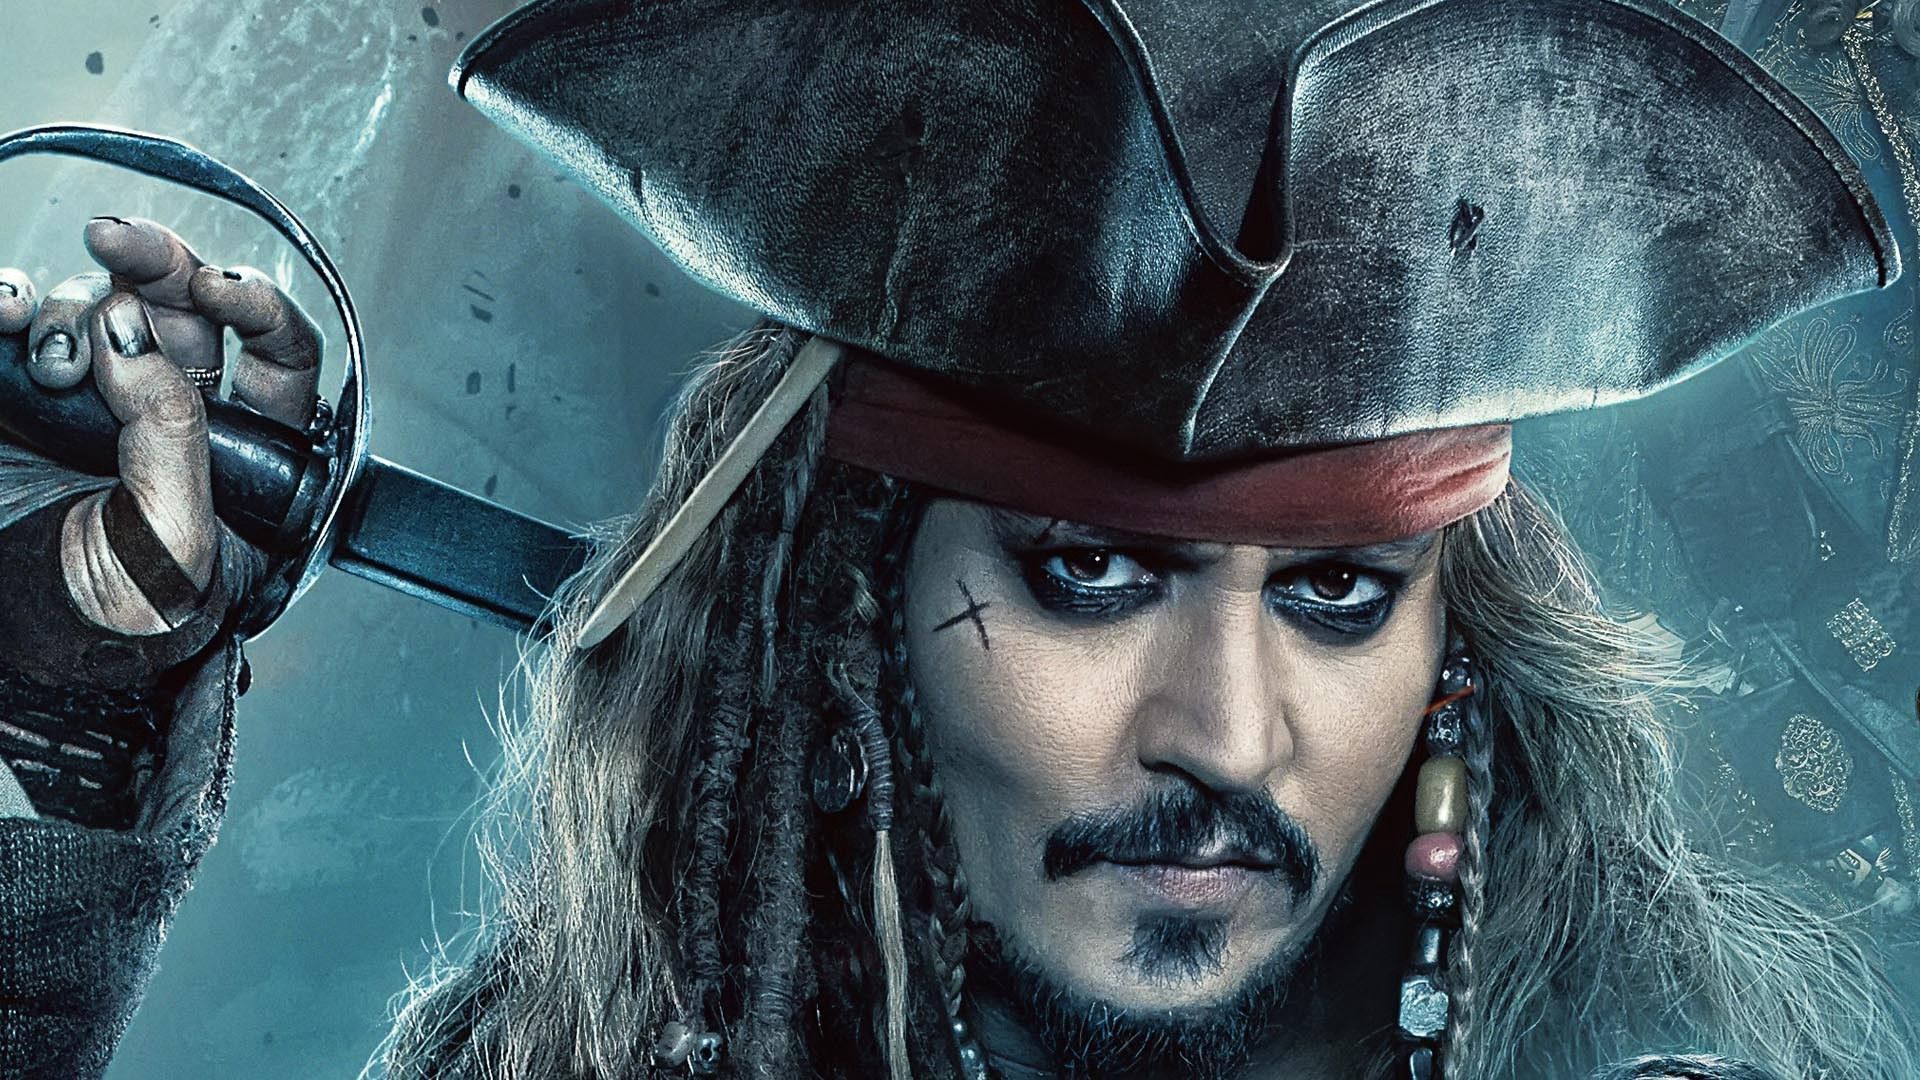 Rumored: Will Captain Jack Sparrow Appear in Future 'Pirates of the Caribbean' Movies?. Chip and Company